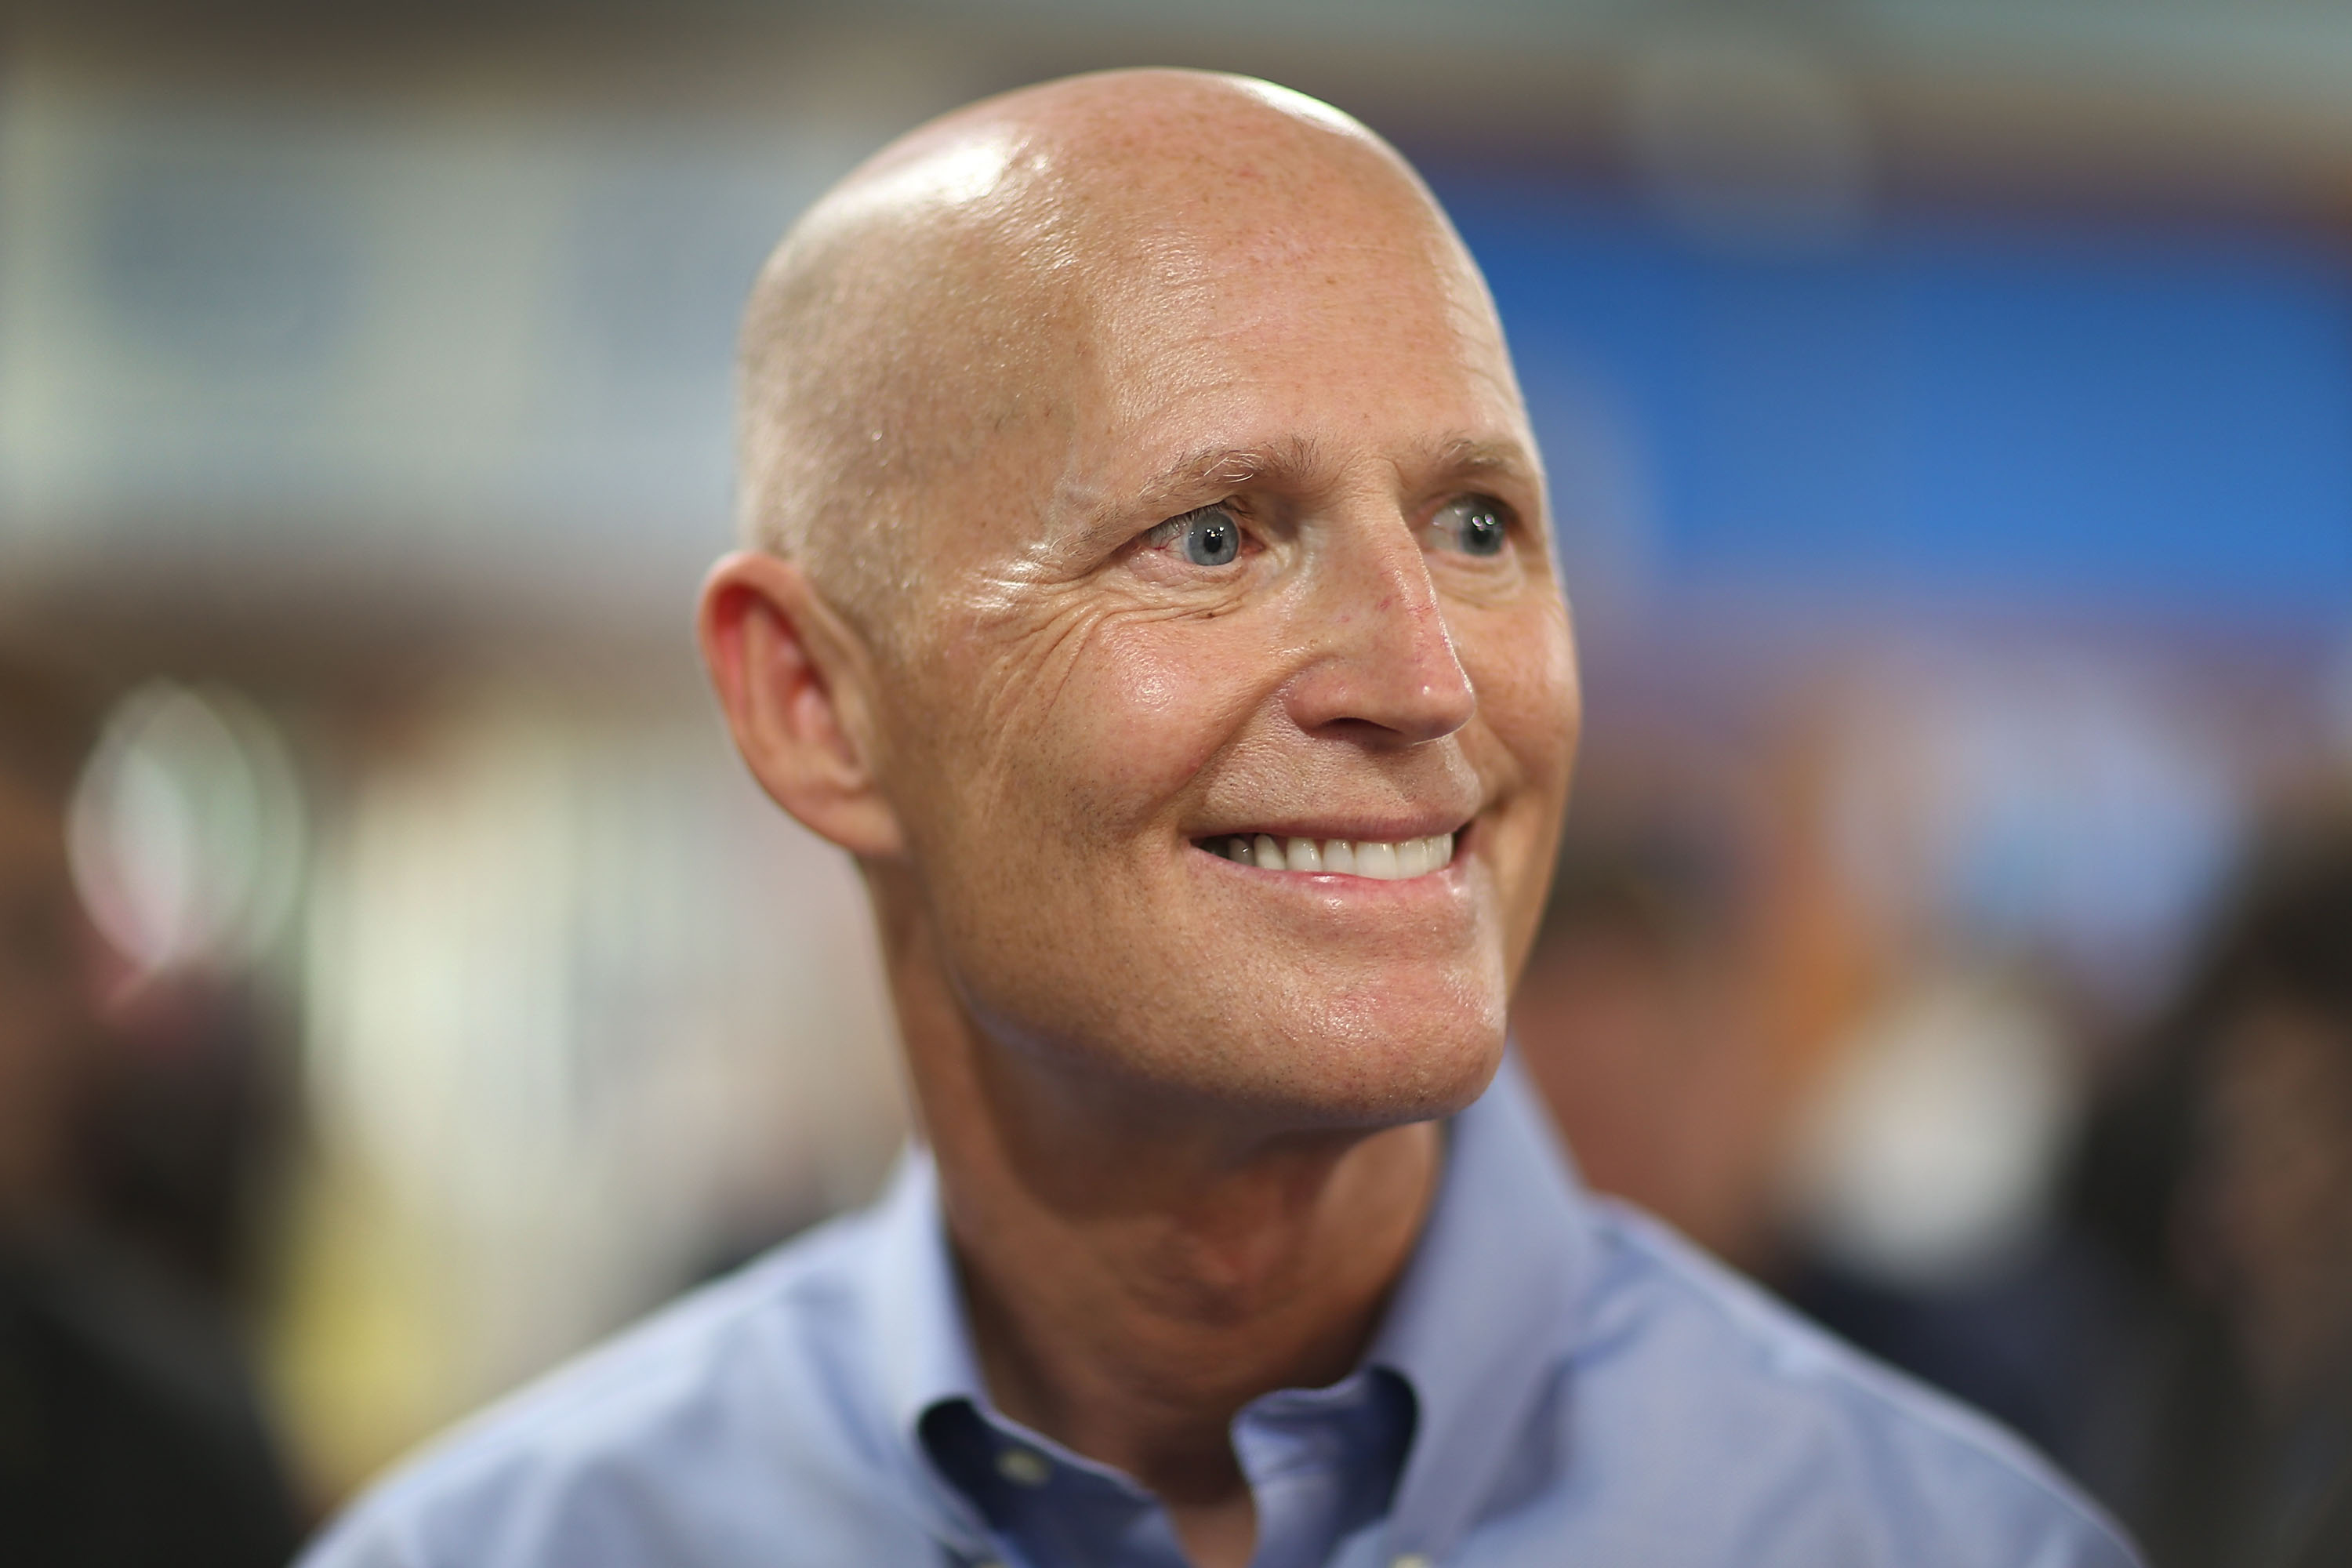 Florida Gov. Rick Scott as he visits the Marian Center which offers services for people with intellectual disabilities on July 13, 2015 in Miami Gardens, Fla. (Joe Raedle/Getty Images)